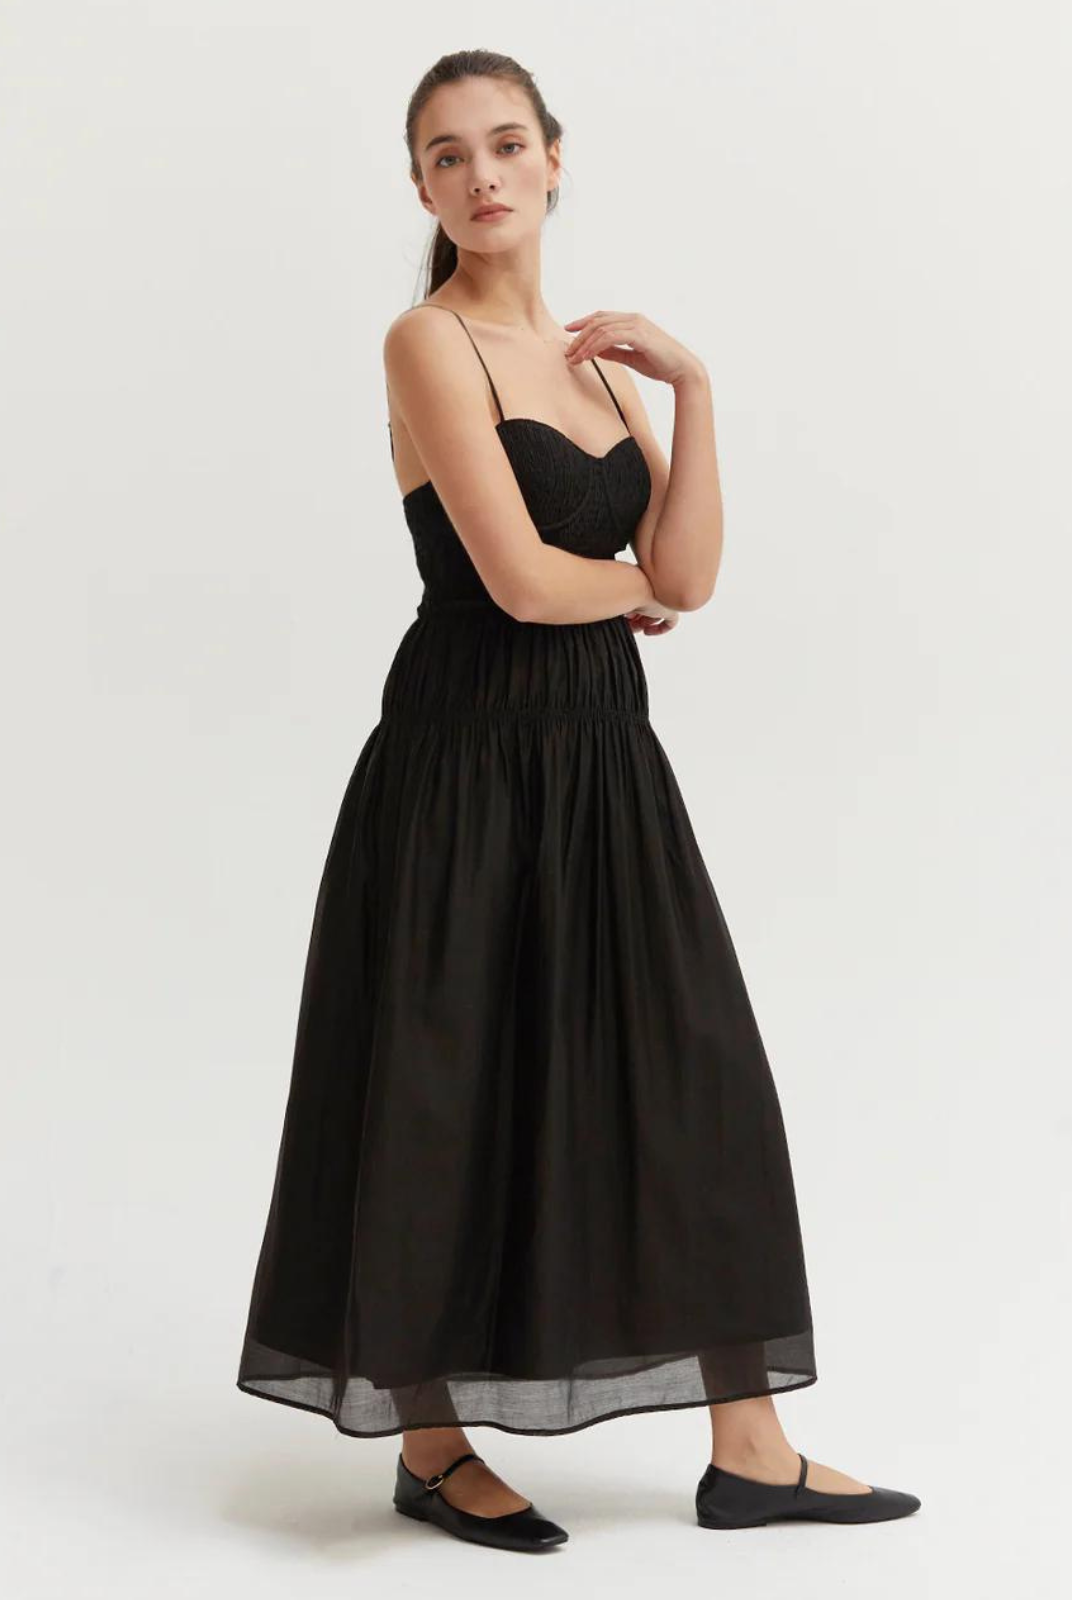 Lucy Tencel Blend Midi Dress- Black.Made with airy and semi sheer Tencel-blend, the Lucy Tencel Blend Midi Dress features smocked bustier with bra cup, adjustable spaghetti straps, side invisible zipper closure, and elasticized ruffle detail at waistline.